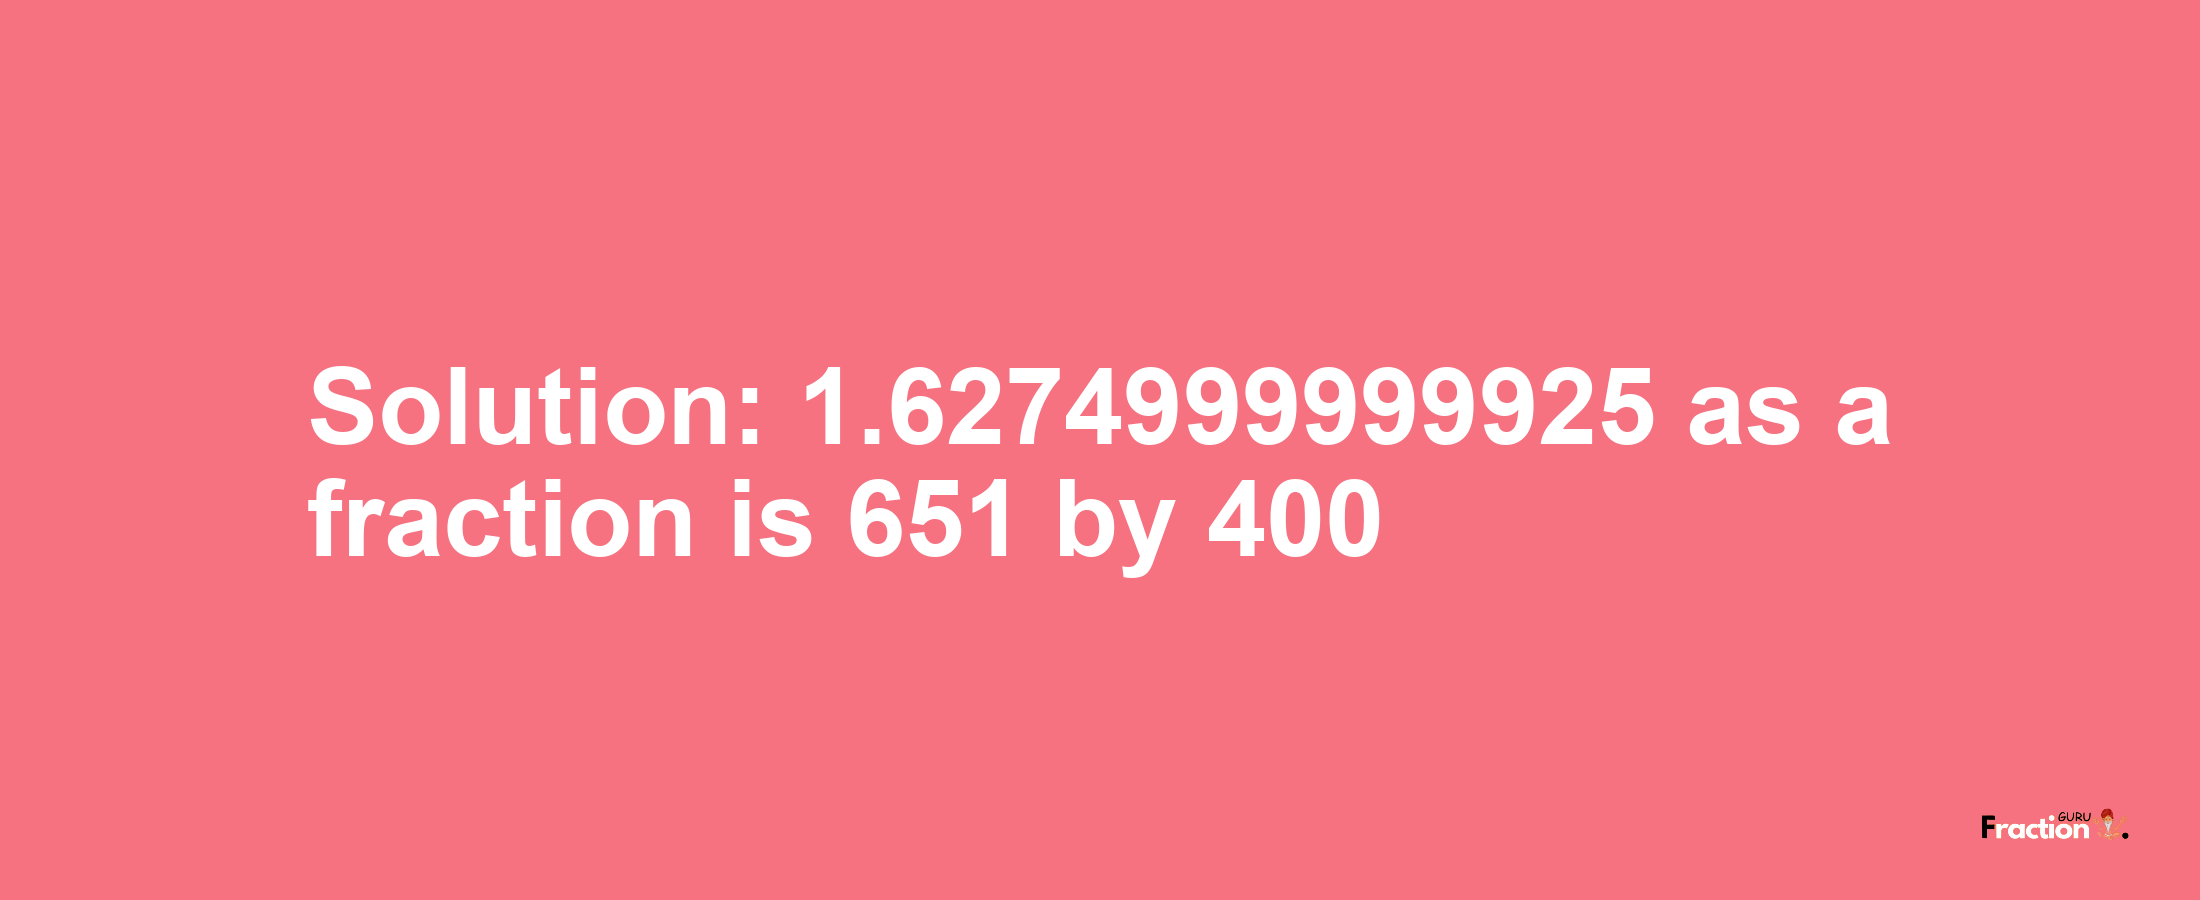 Solution:1.6274999999925 as a fraction is 651/400